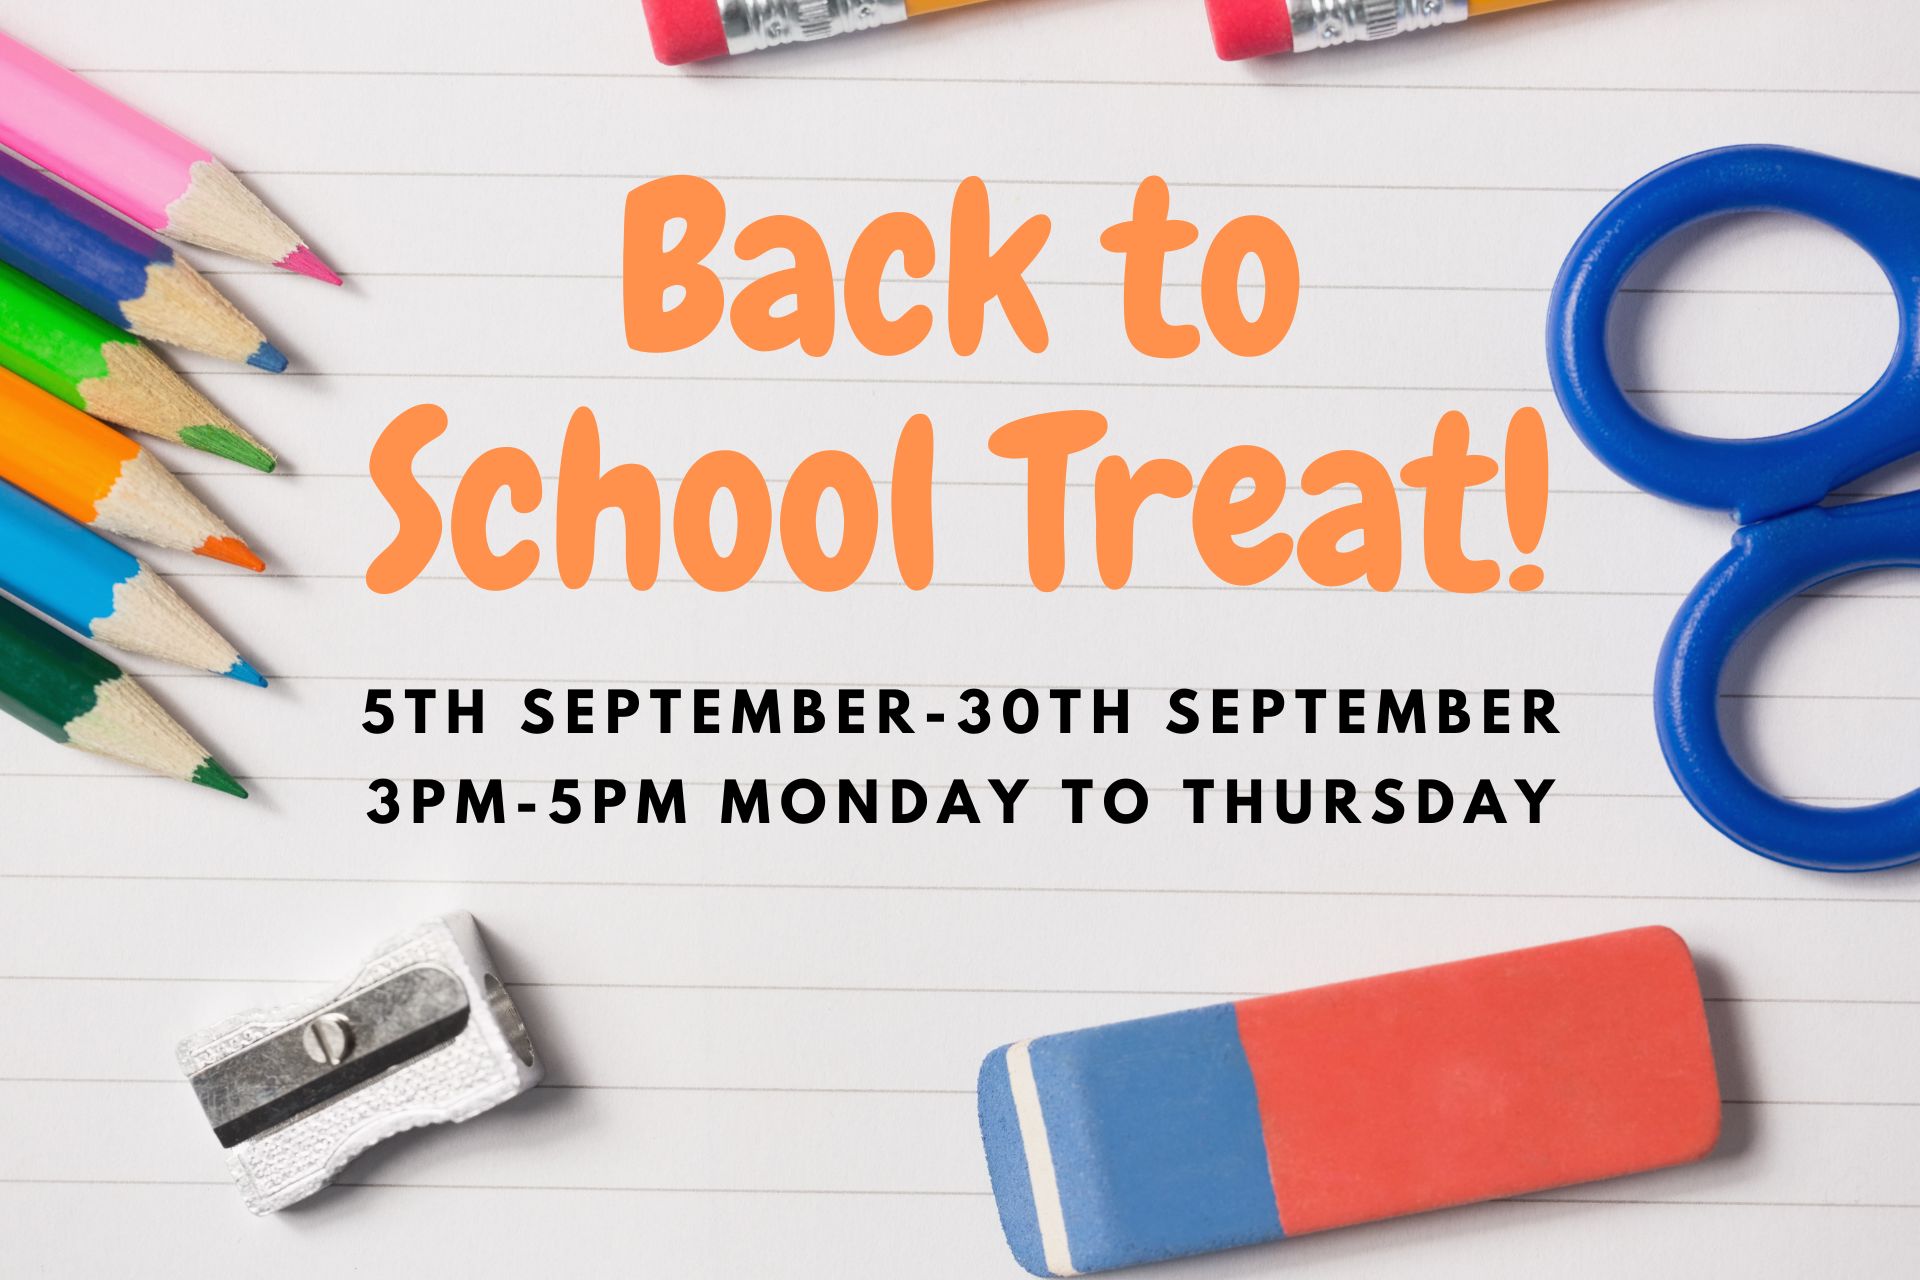 Back to School Treat at the Thatched Tavern Honeybourne - Youngster's Eat for Half Price!